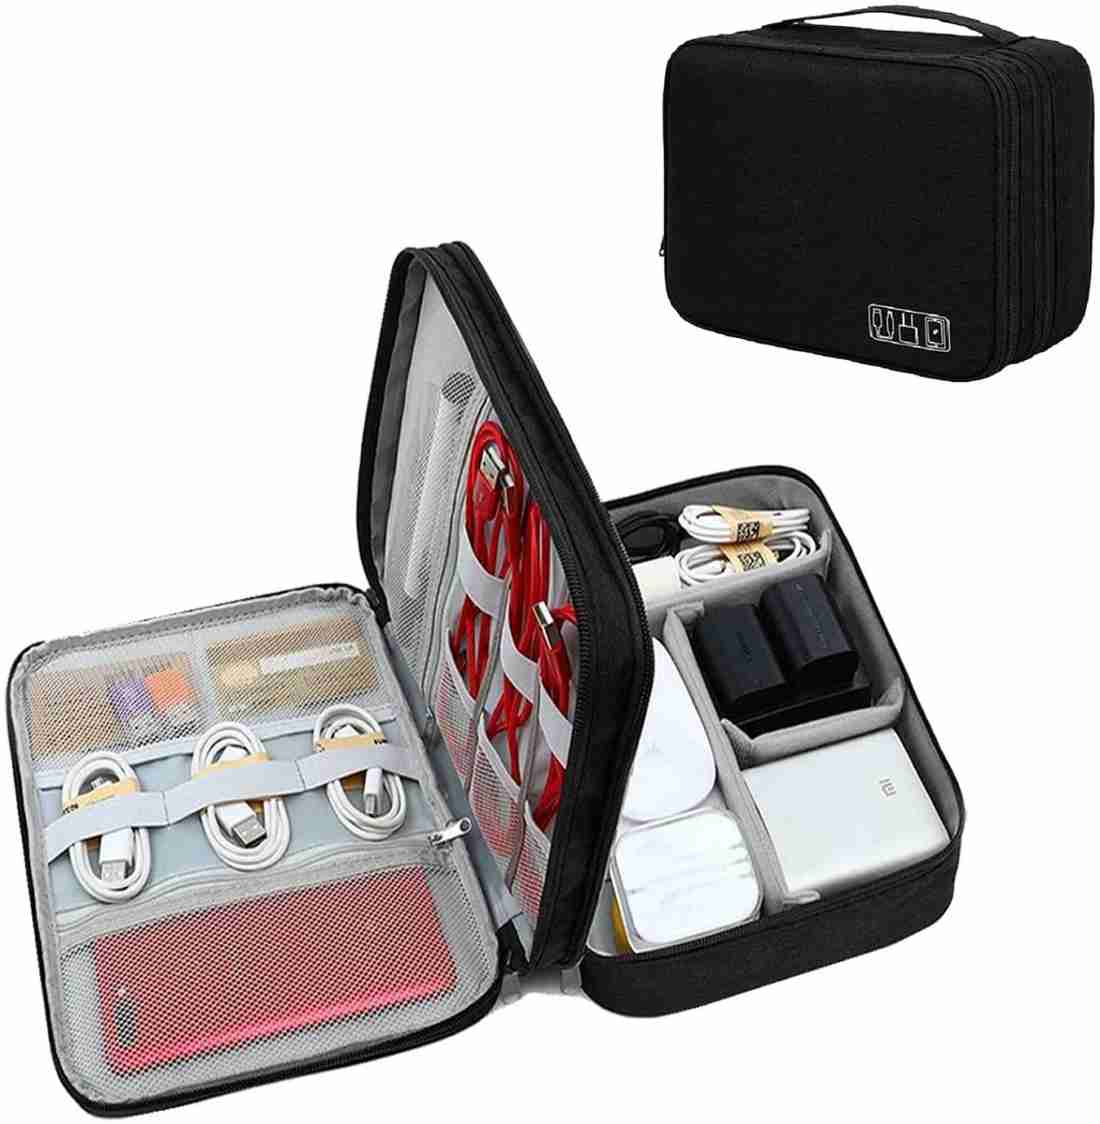 ELITEHOME Electronic Accessories Travel Gadgets Bag for Cable